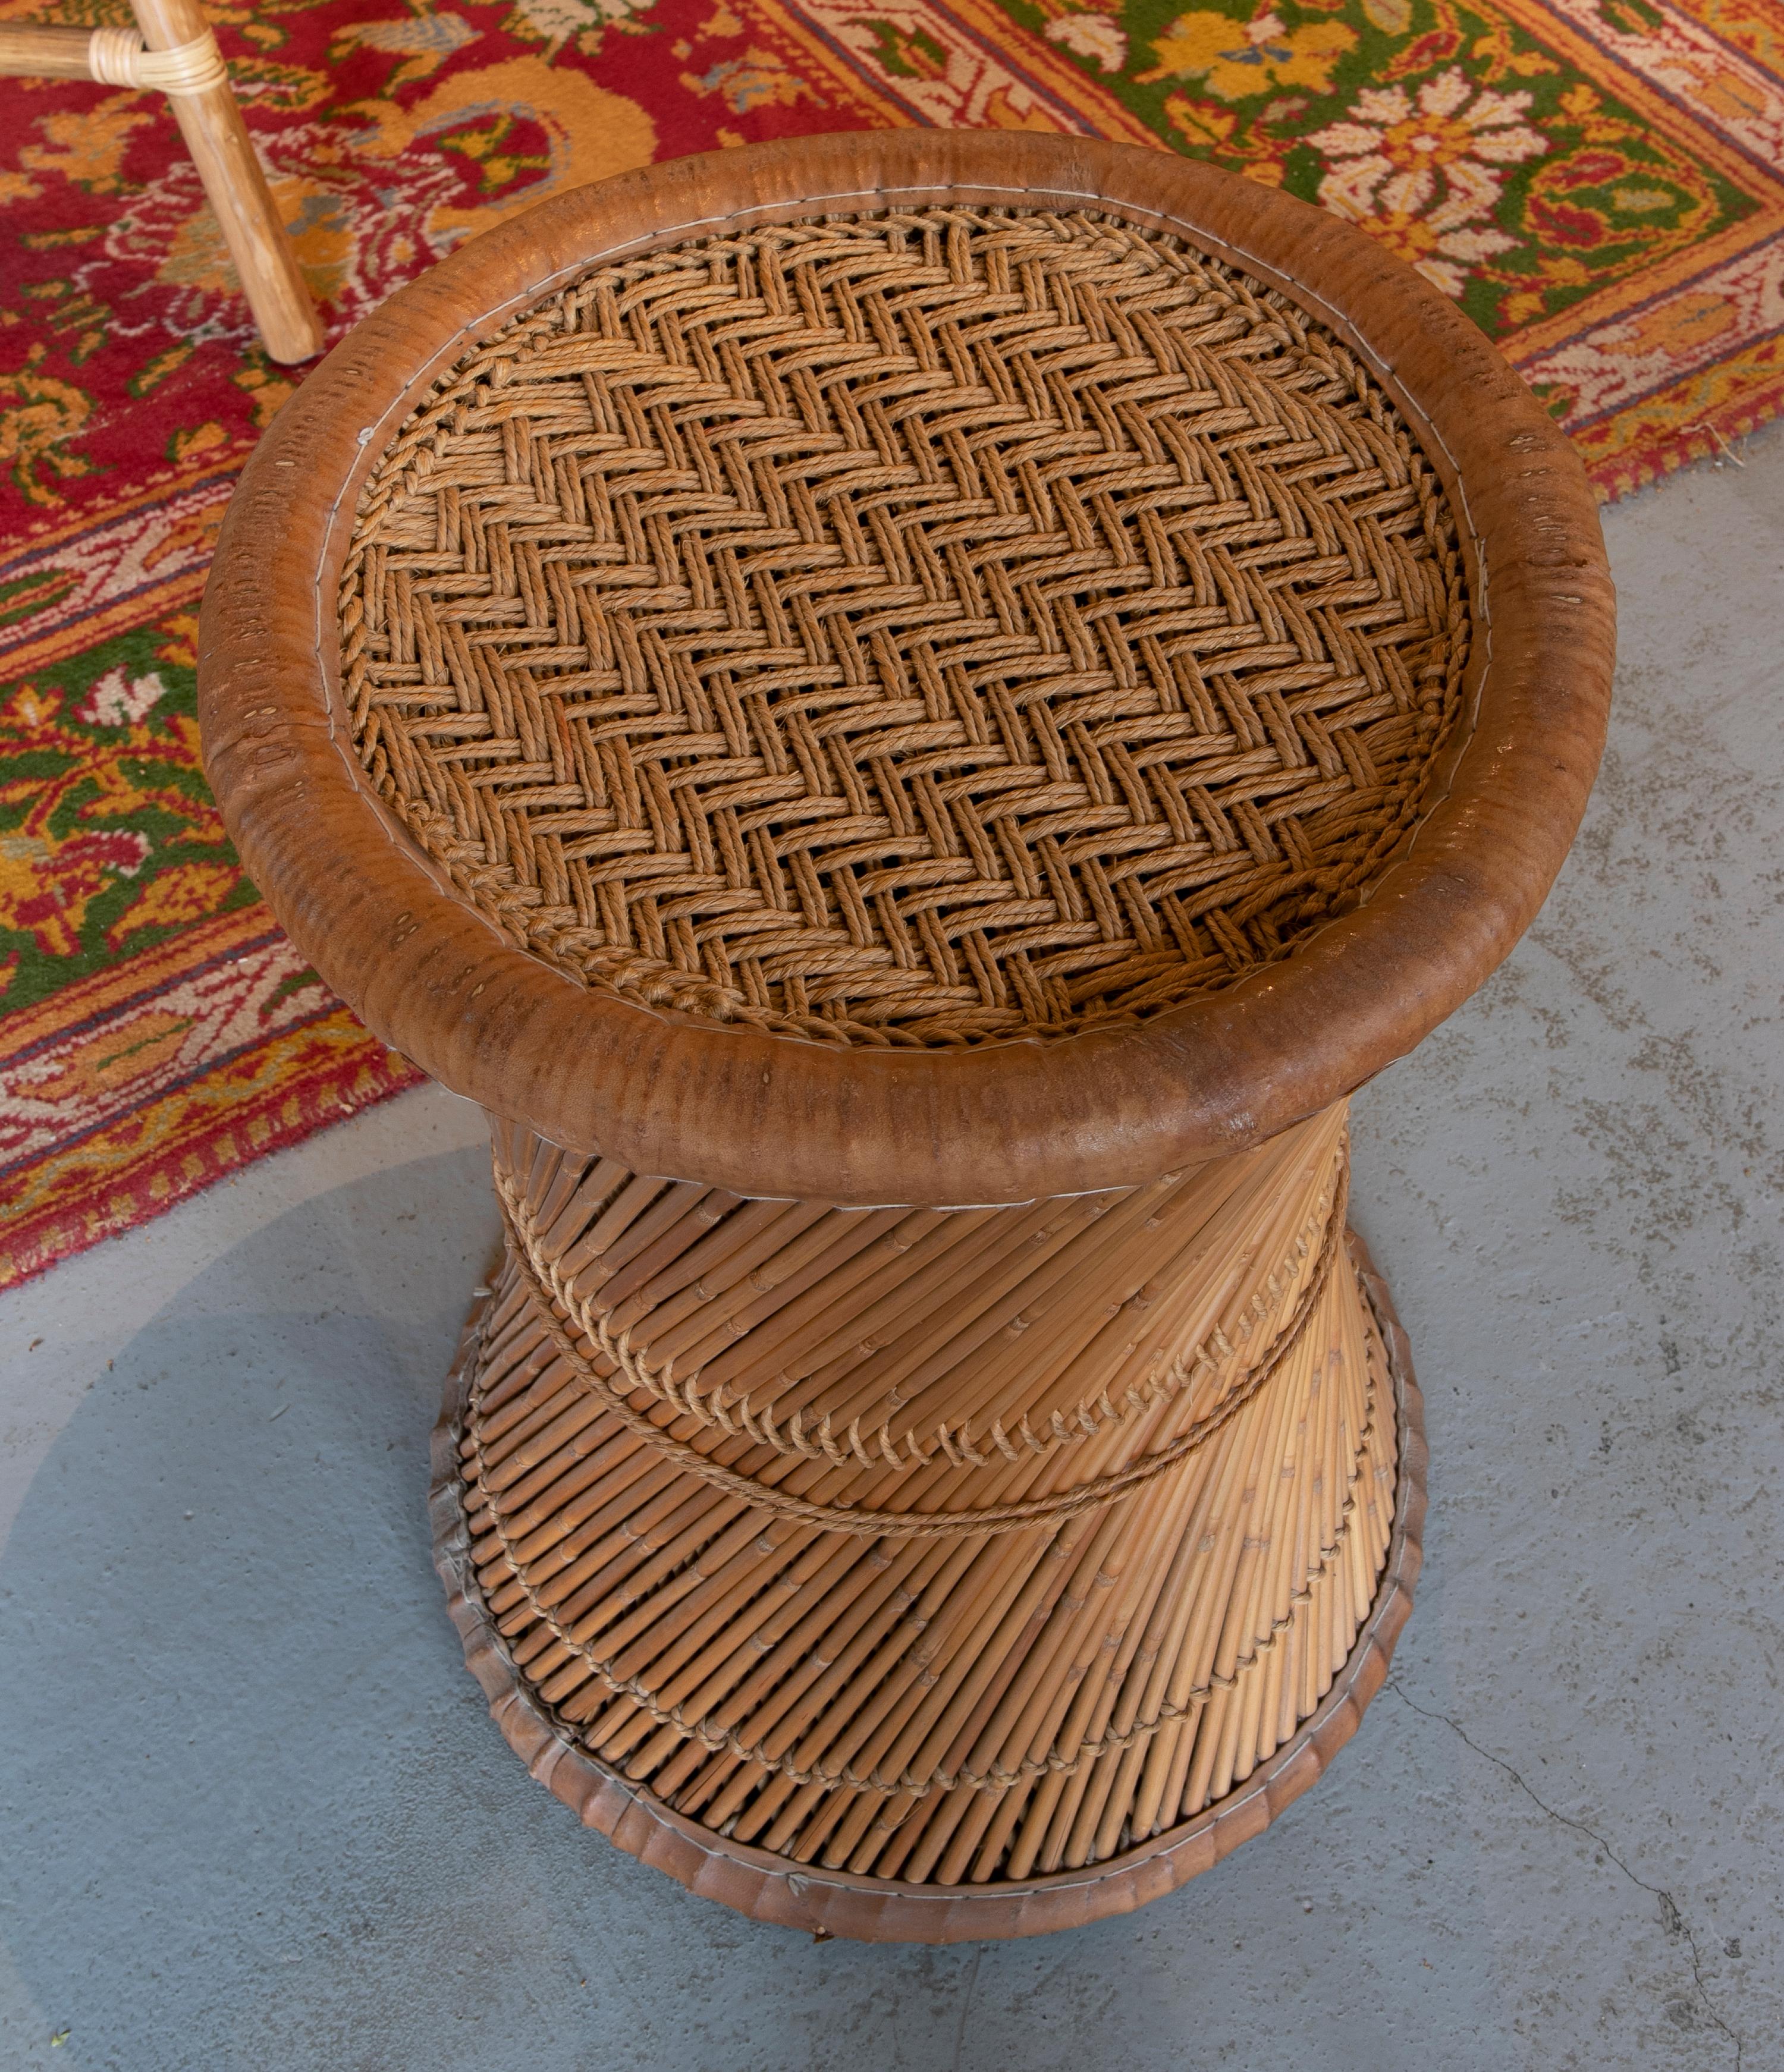 20th Century Wicker and Leather Stool  Handmade with Round Shape